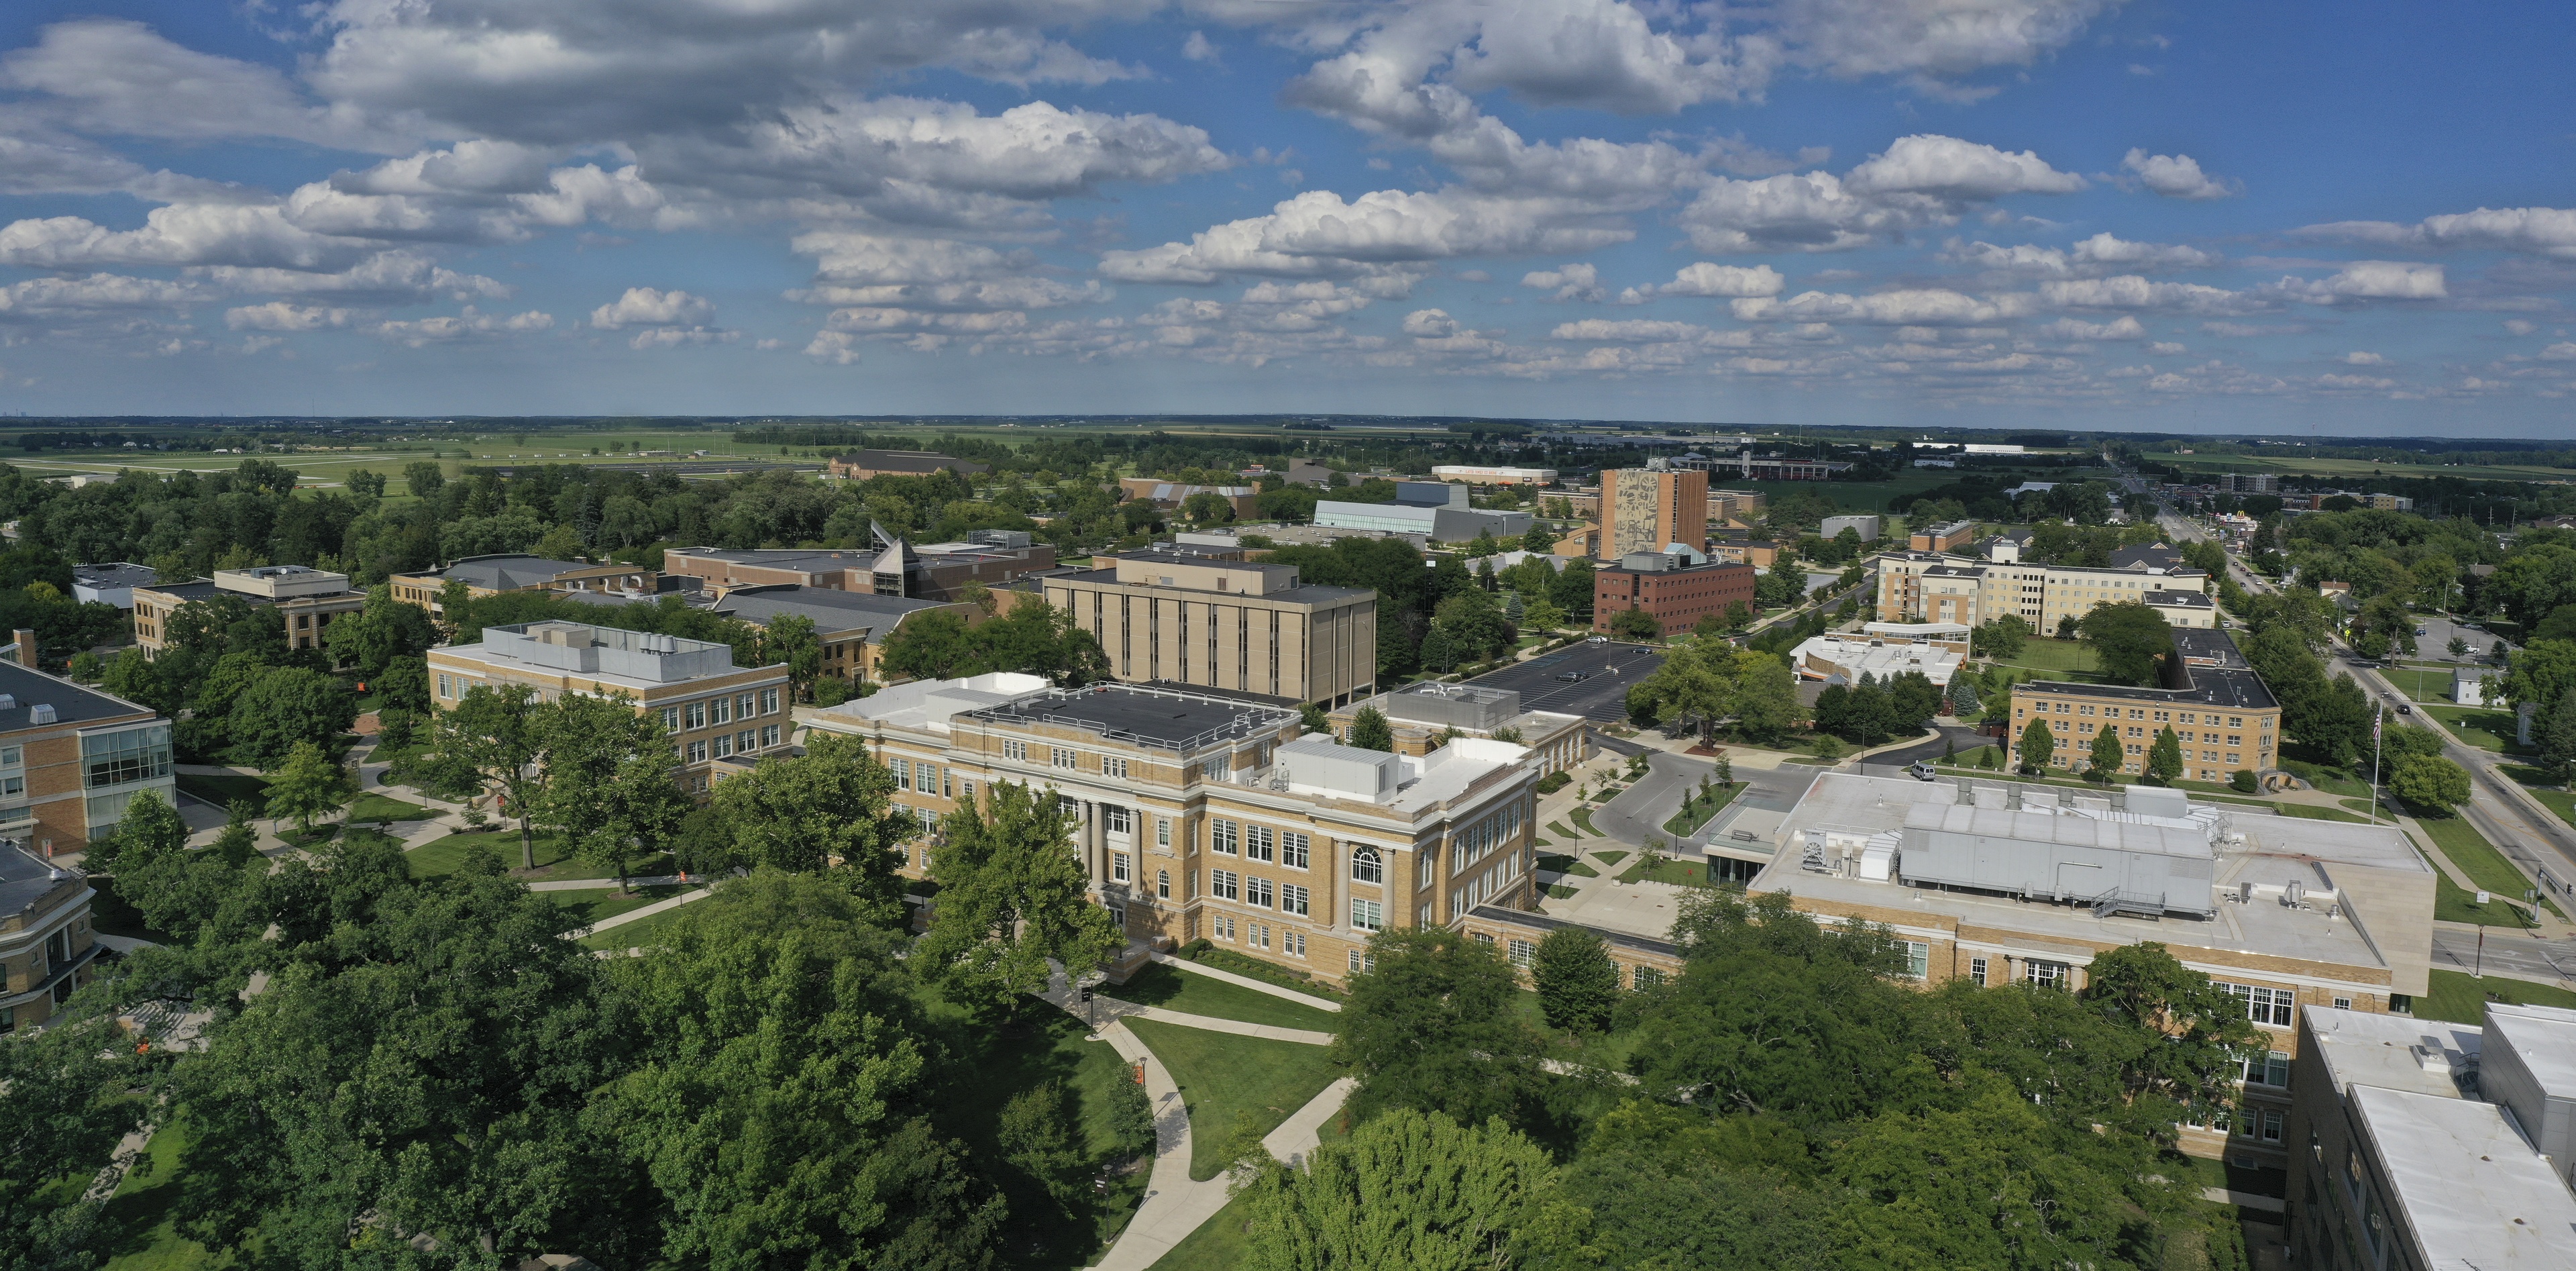 An aerial photo of the Bowling Green State University campus